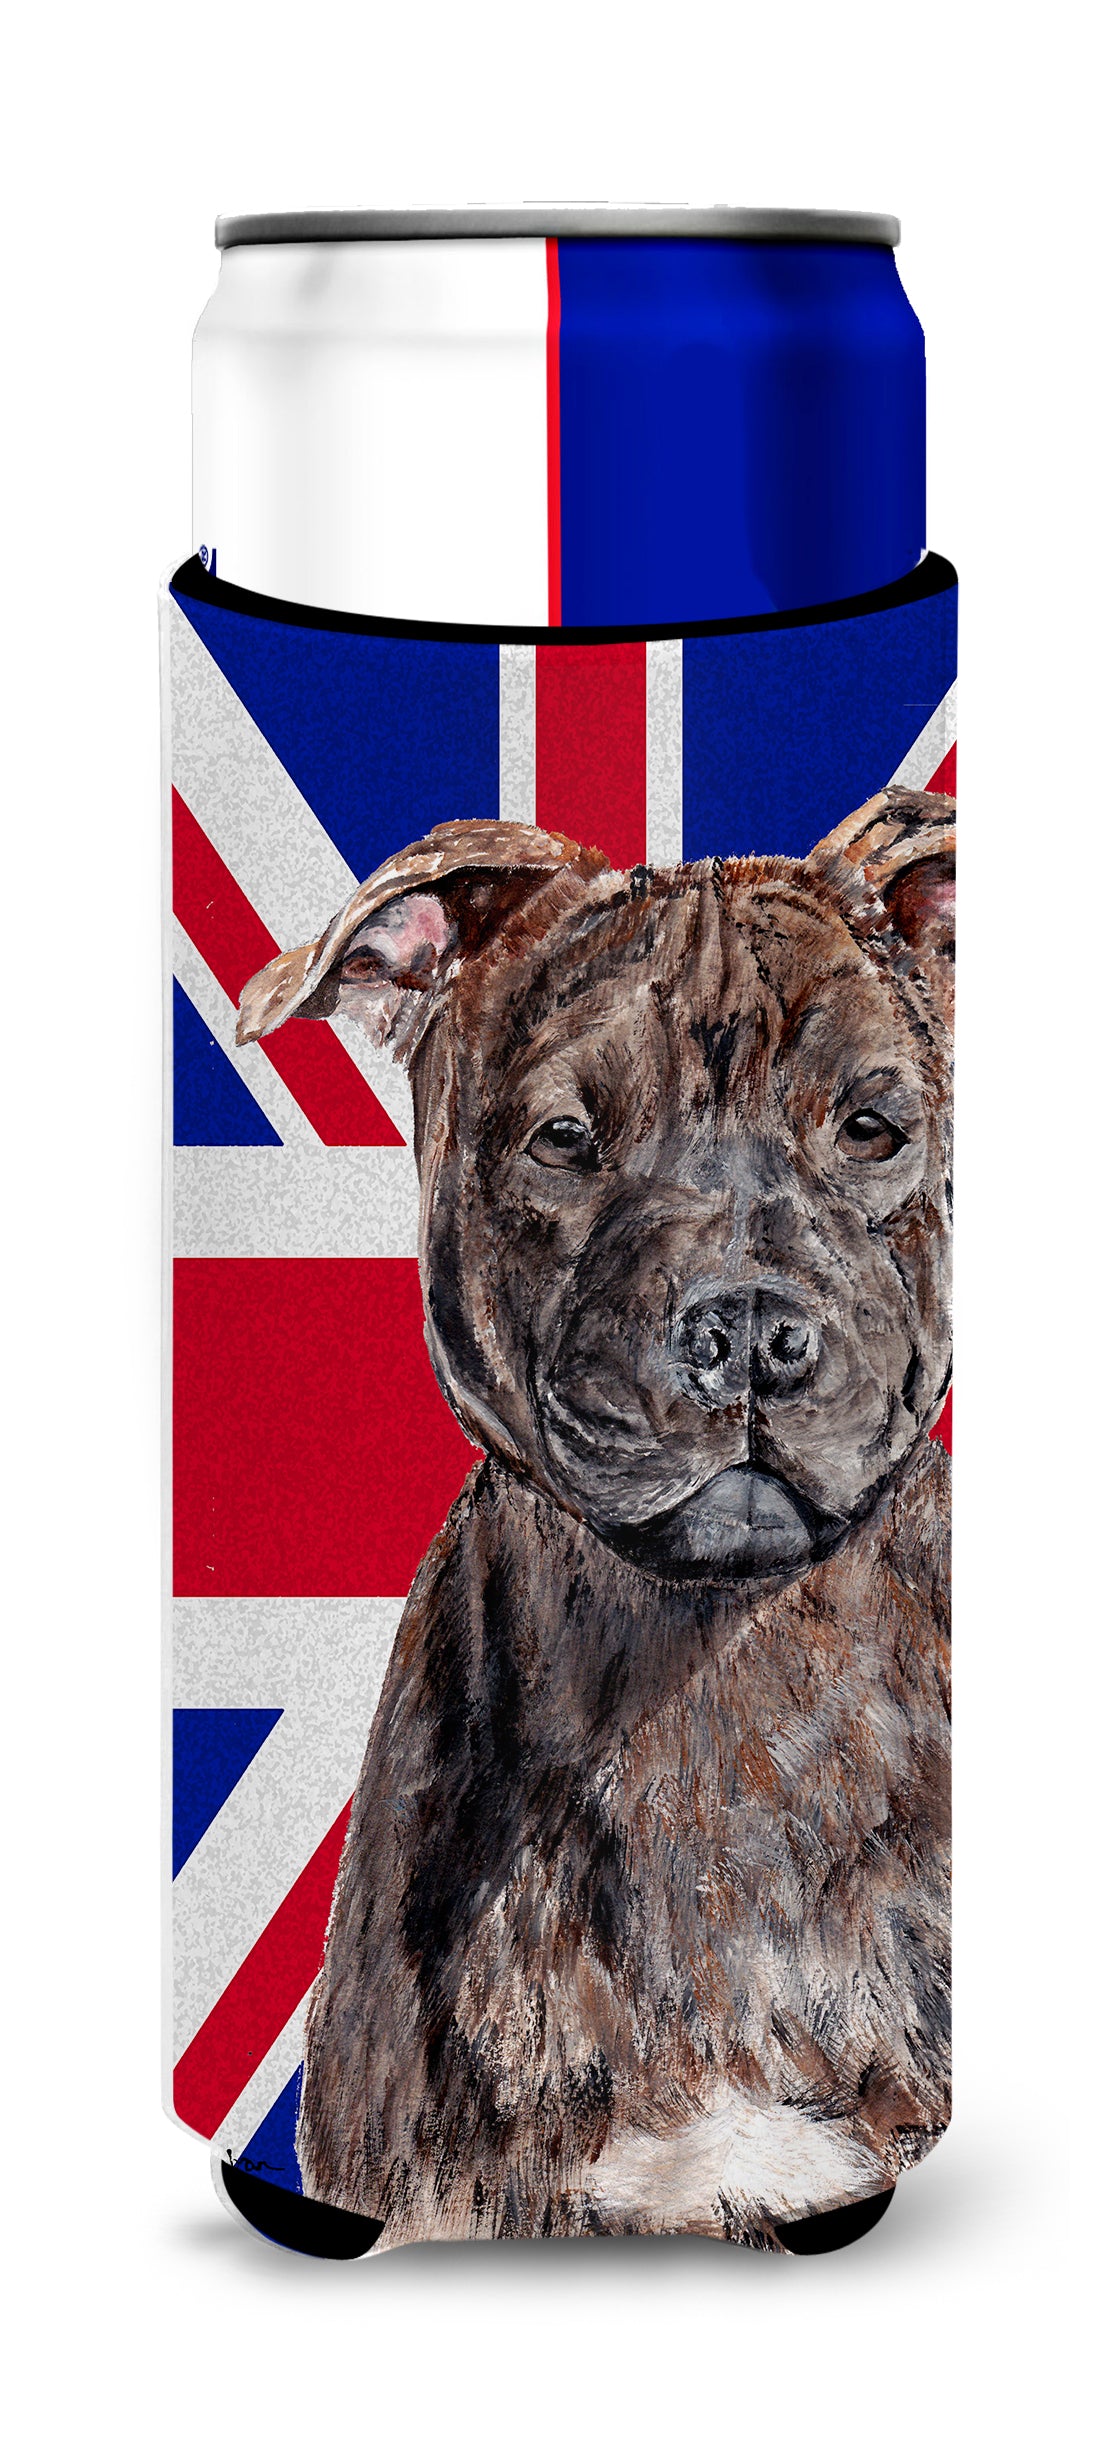 Staffordshire Bull Terrier Staffie with English Union Jack British Flag Ultra Beverage Insulators for slim cans SC9882MUK